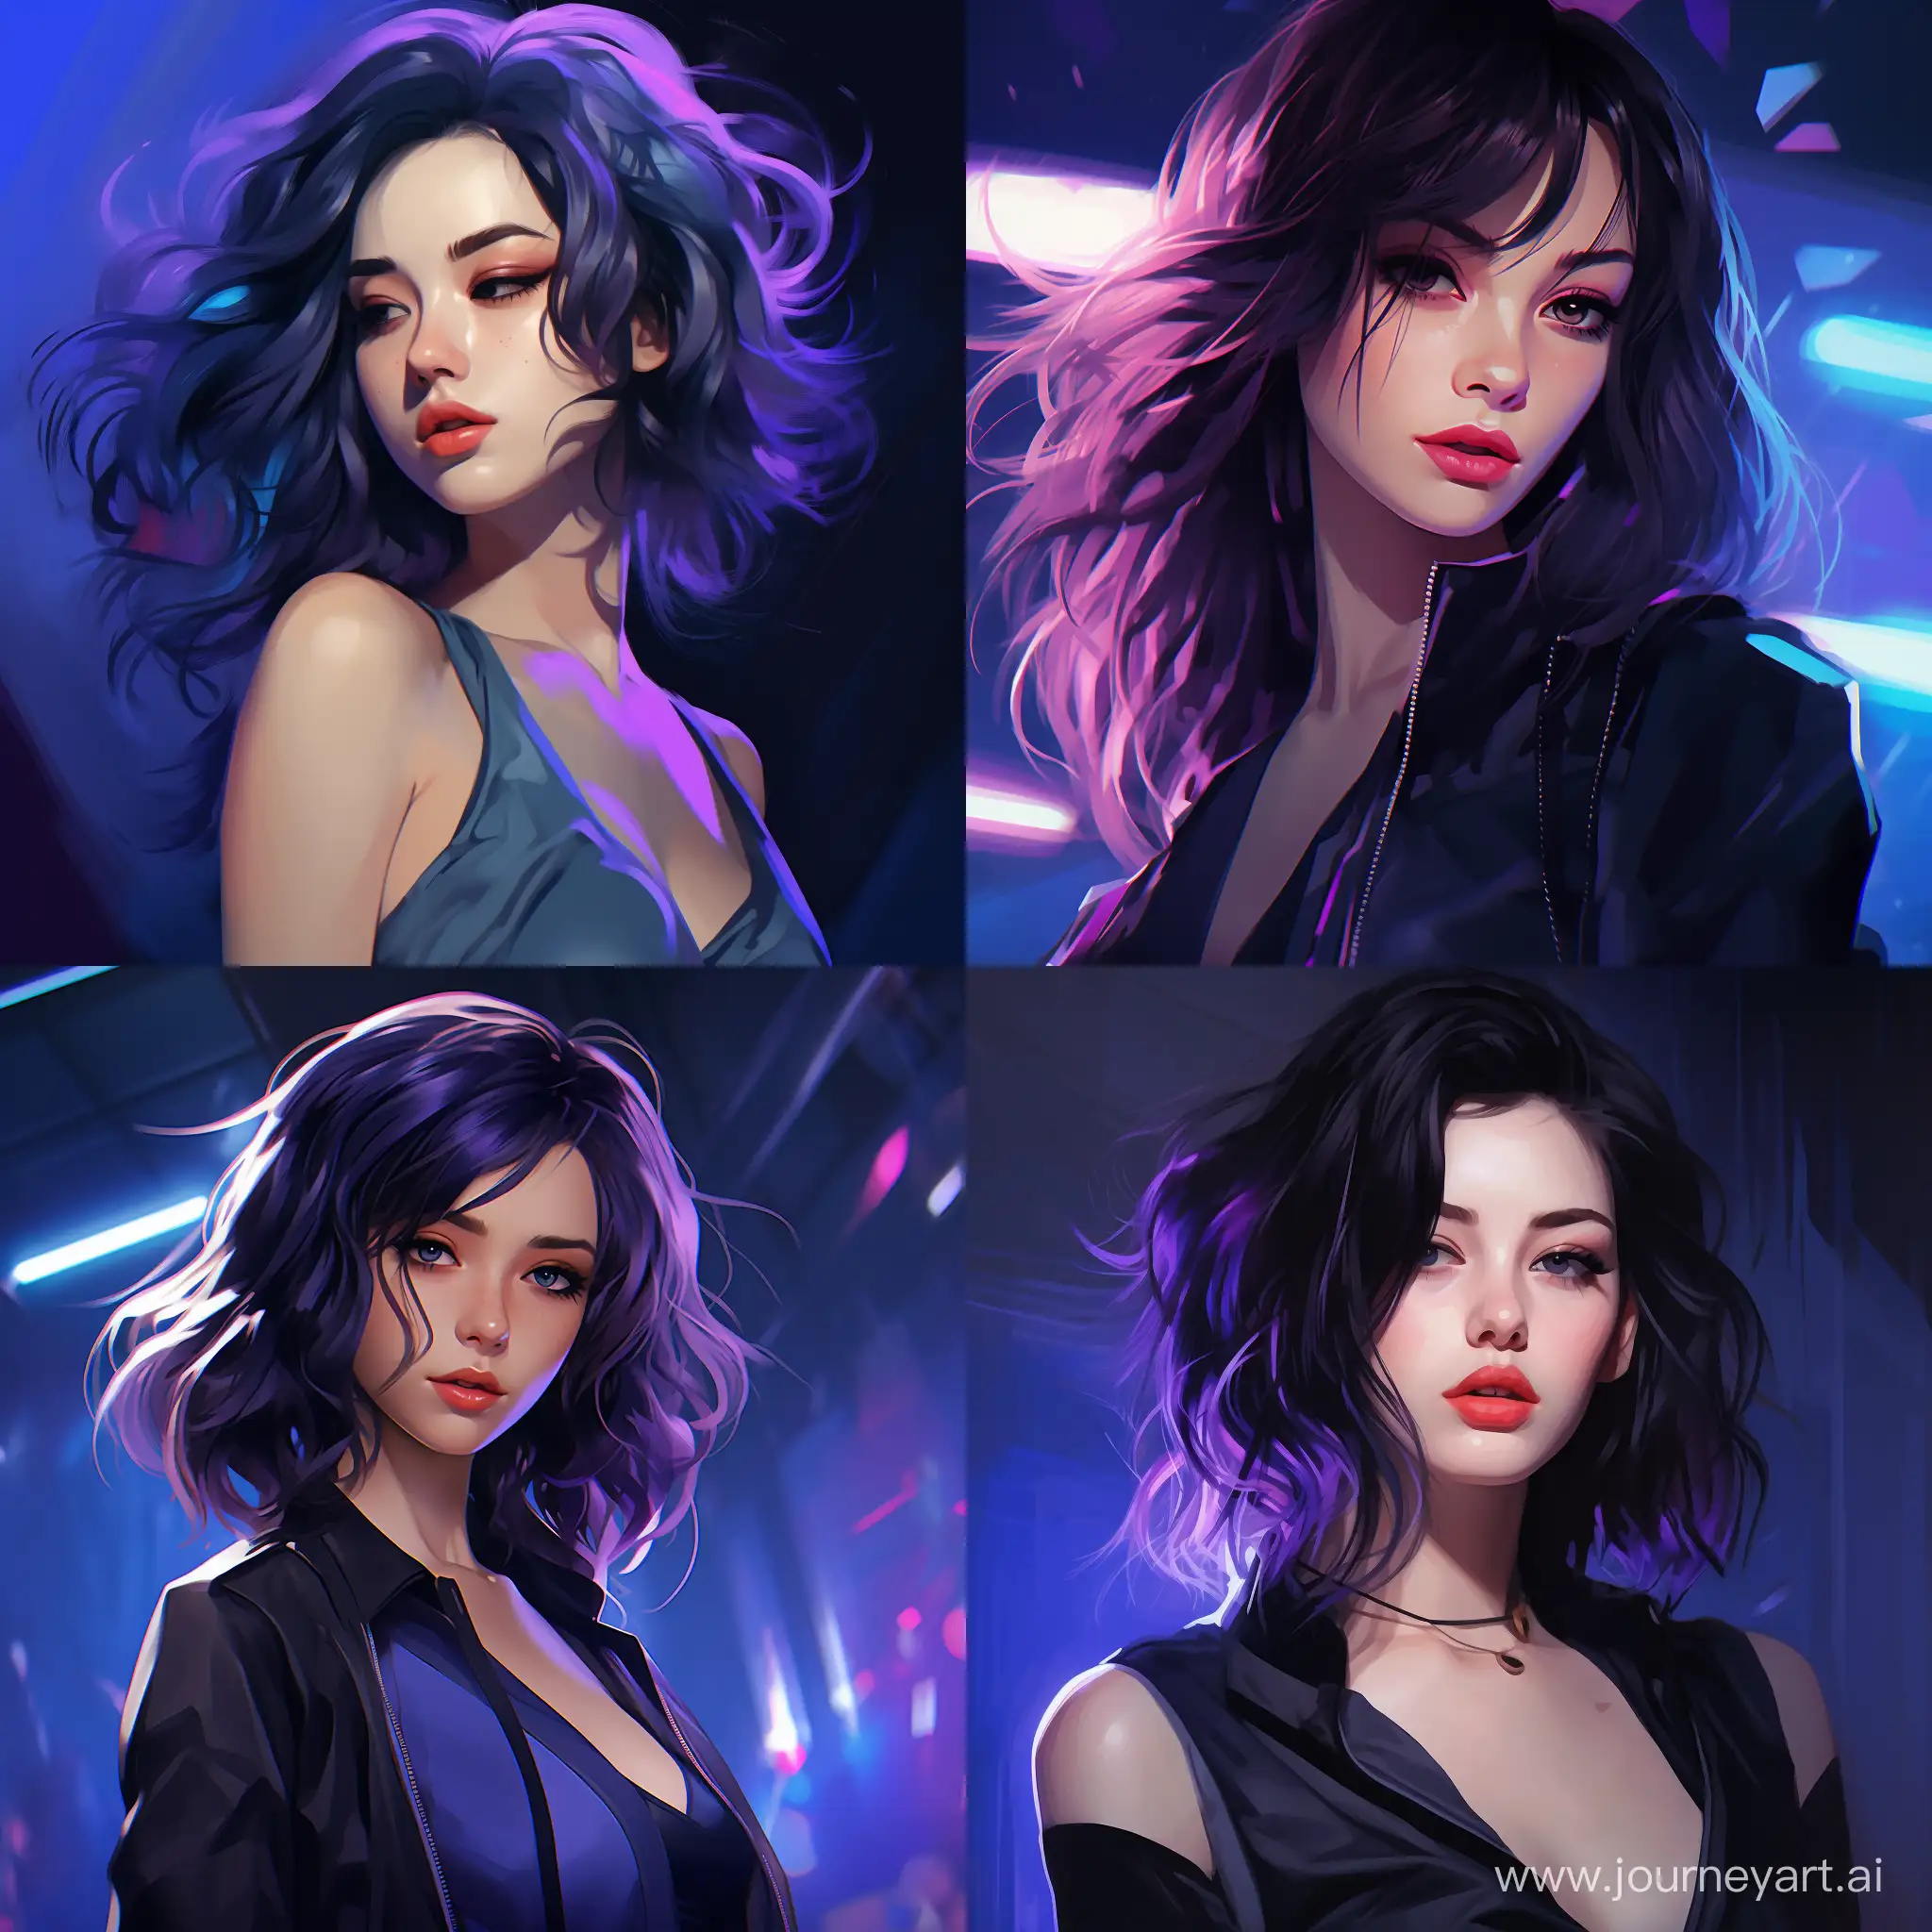 Anime woman portrait , 90s aestethic, digital art, 2d,  purple blue, high contrast, nightlife, inspired by nogami saeko from city hunter anime serie, realistic